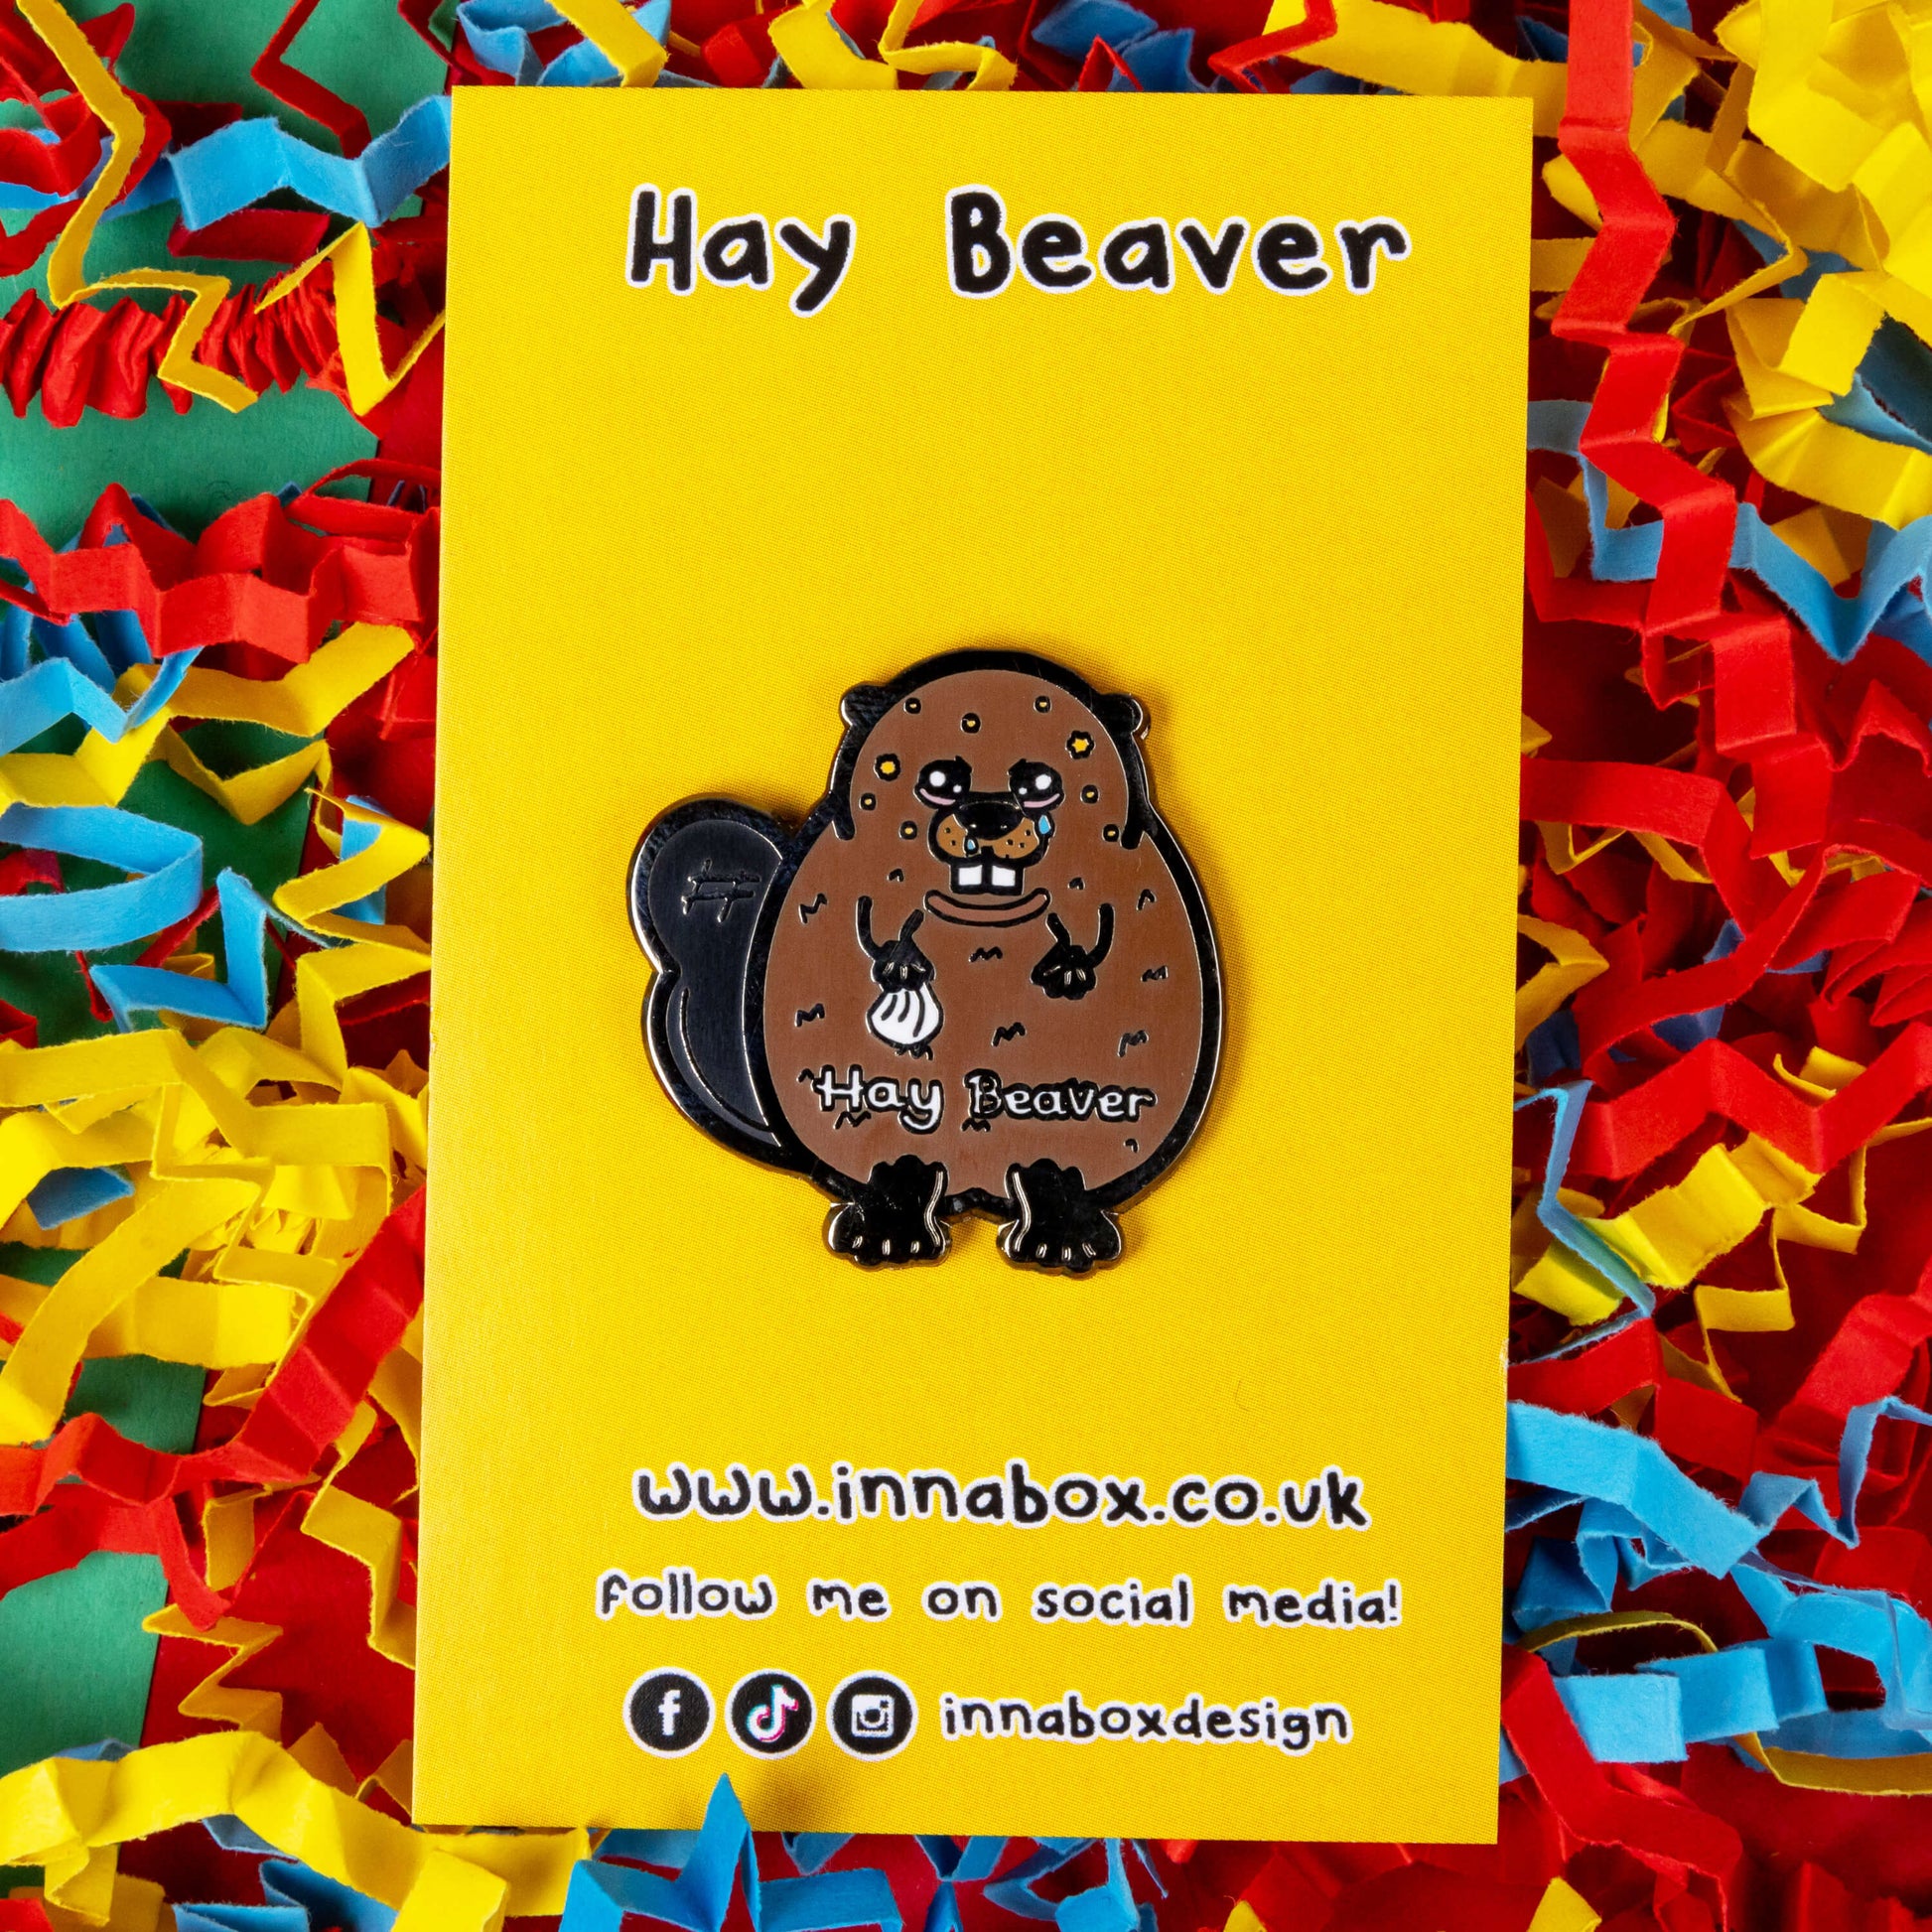 Hay Beaver Enamel Pin - Hay Fever on yellow backing in front of blue, yellow and red coloured card confetti background. The enamel pin is a brown beaver with watery eyes, dripping nose and yellow spots on face and is holding a tissue with it's little hand. Hay beaver is written across its belly. The enamel pin is designed to raise awareness for hay fever or allergic rhinitis